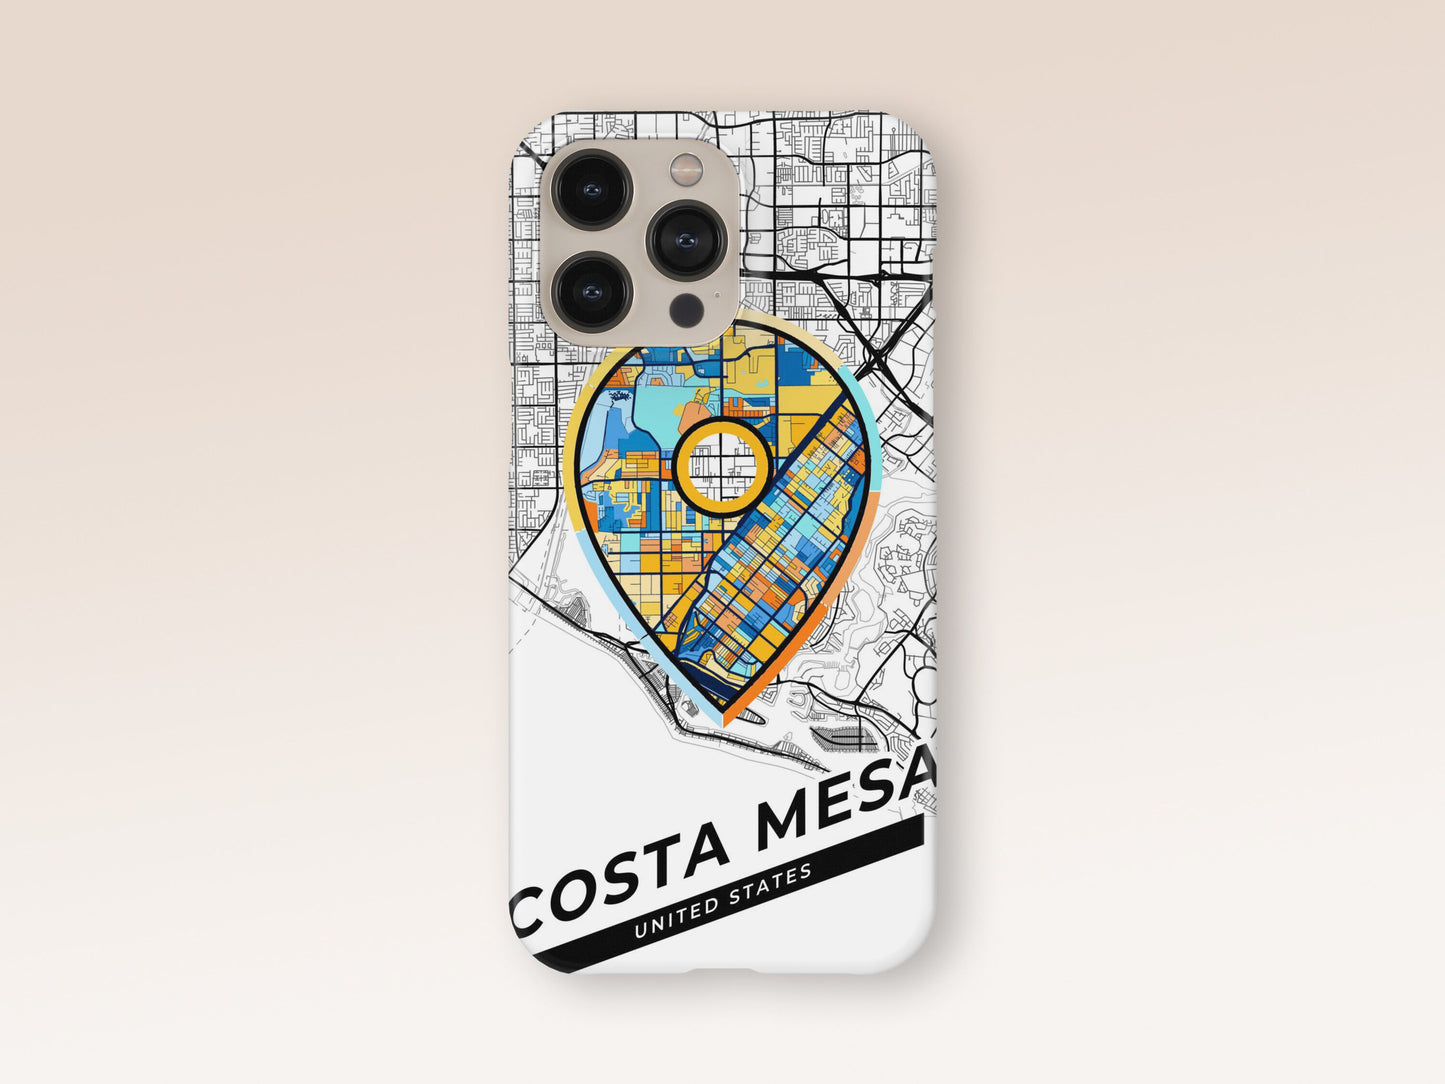 Costa Mesa California slim phone case with colorful icon. Birthday, wedding or housewarming gift. Couple match cases. 1